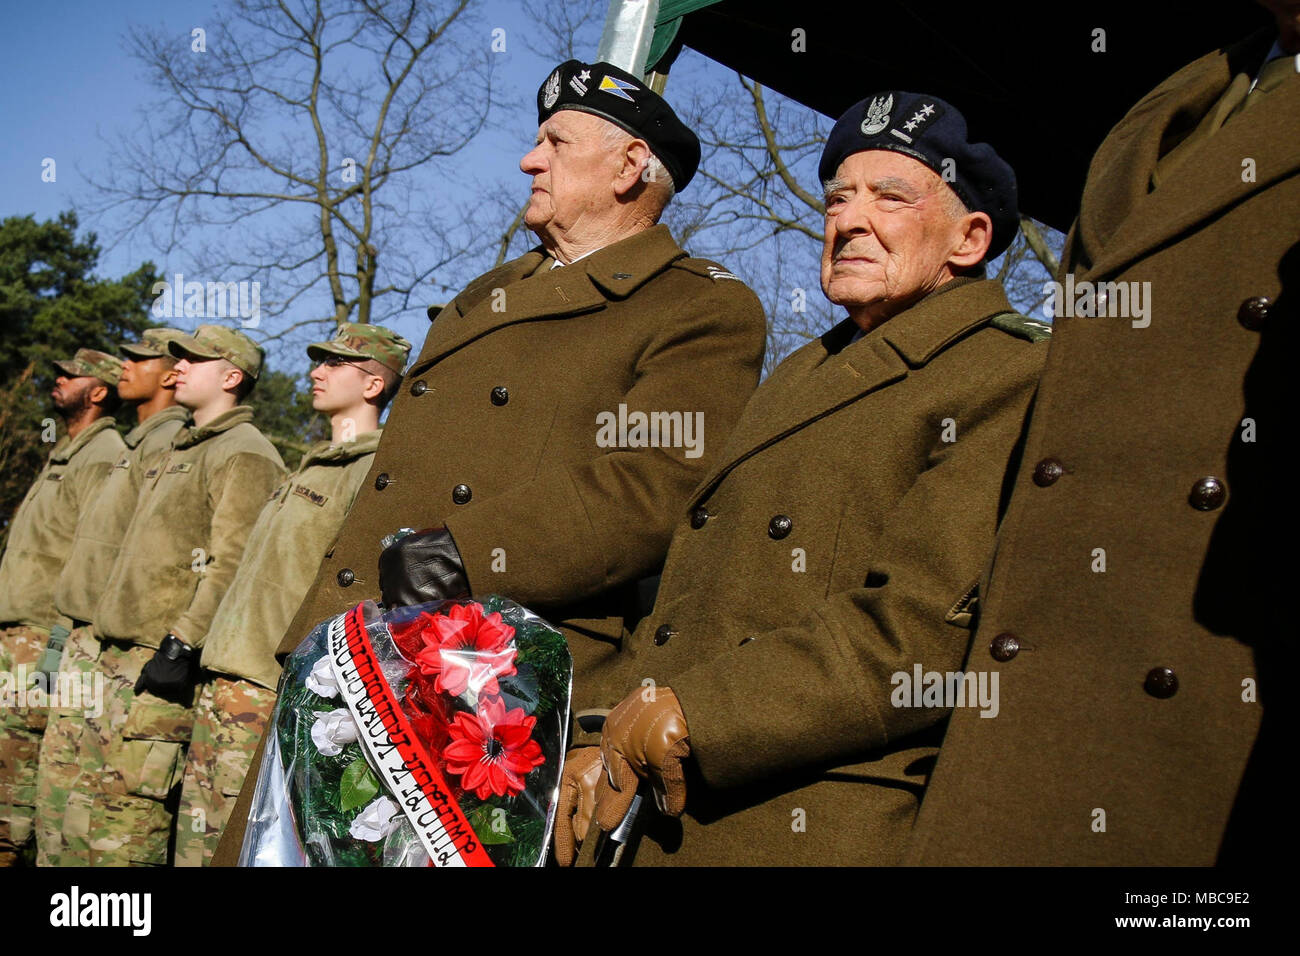 Former Polish army 2nd Lt. Piotr Gubernator (right), a World War II veteran, waits to present a wreath of flowers with fellow veterans during a ceremony to remember the 73rd anniversary of the Battle of Zagan outside of the Stalag Luft III Prisoner Camp Museum in Zagan, Poland on Feb. 16, 2018. (U.S. Army Stock Photo